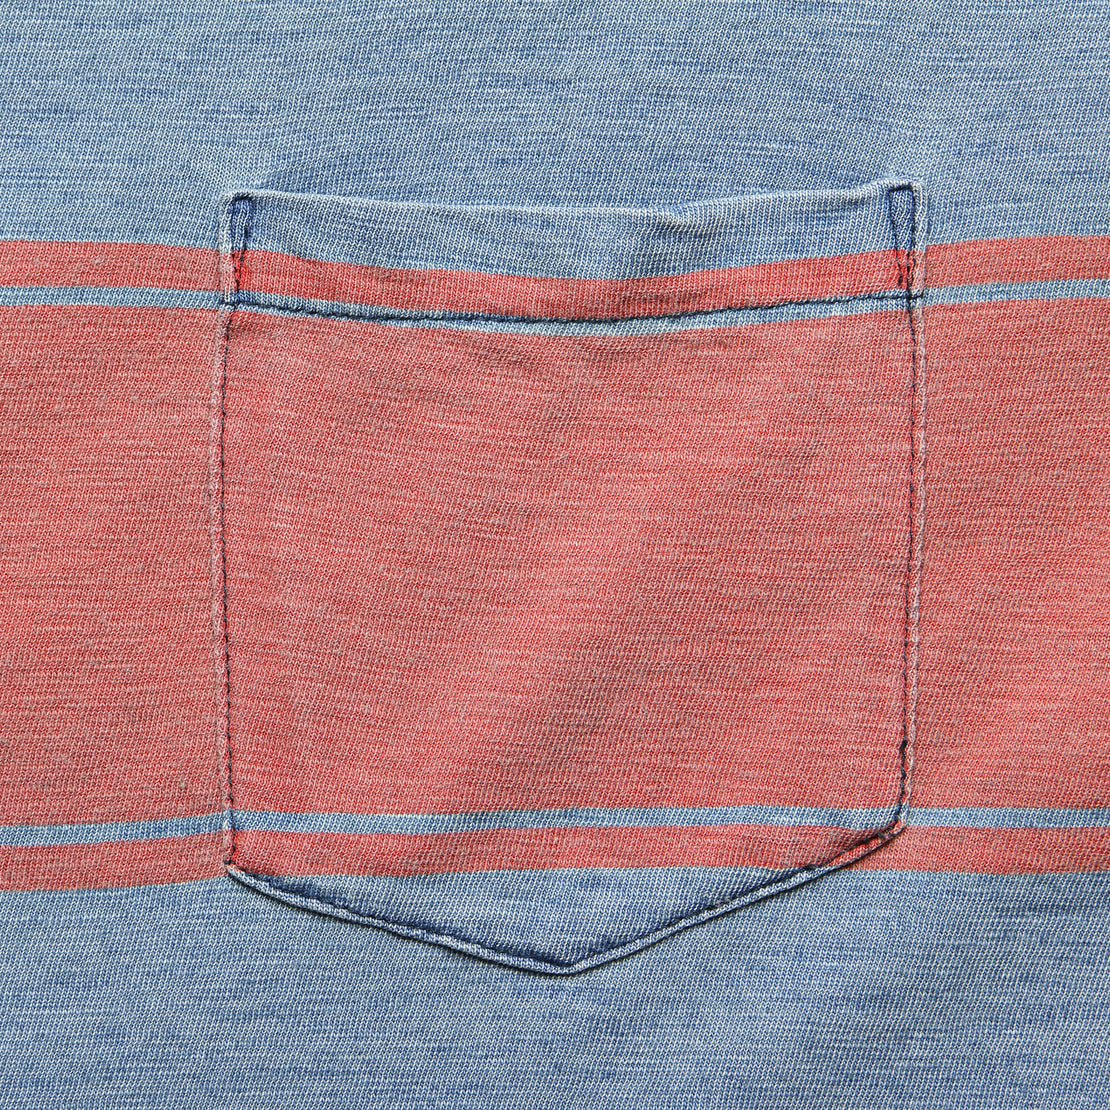 Surf Stripe Pocket Tee - Blue/Red - Faherty - STAG Provisions - Tops - S/S Tee